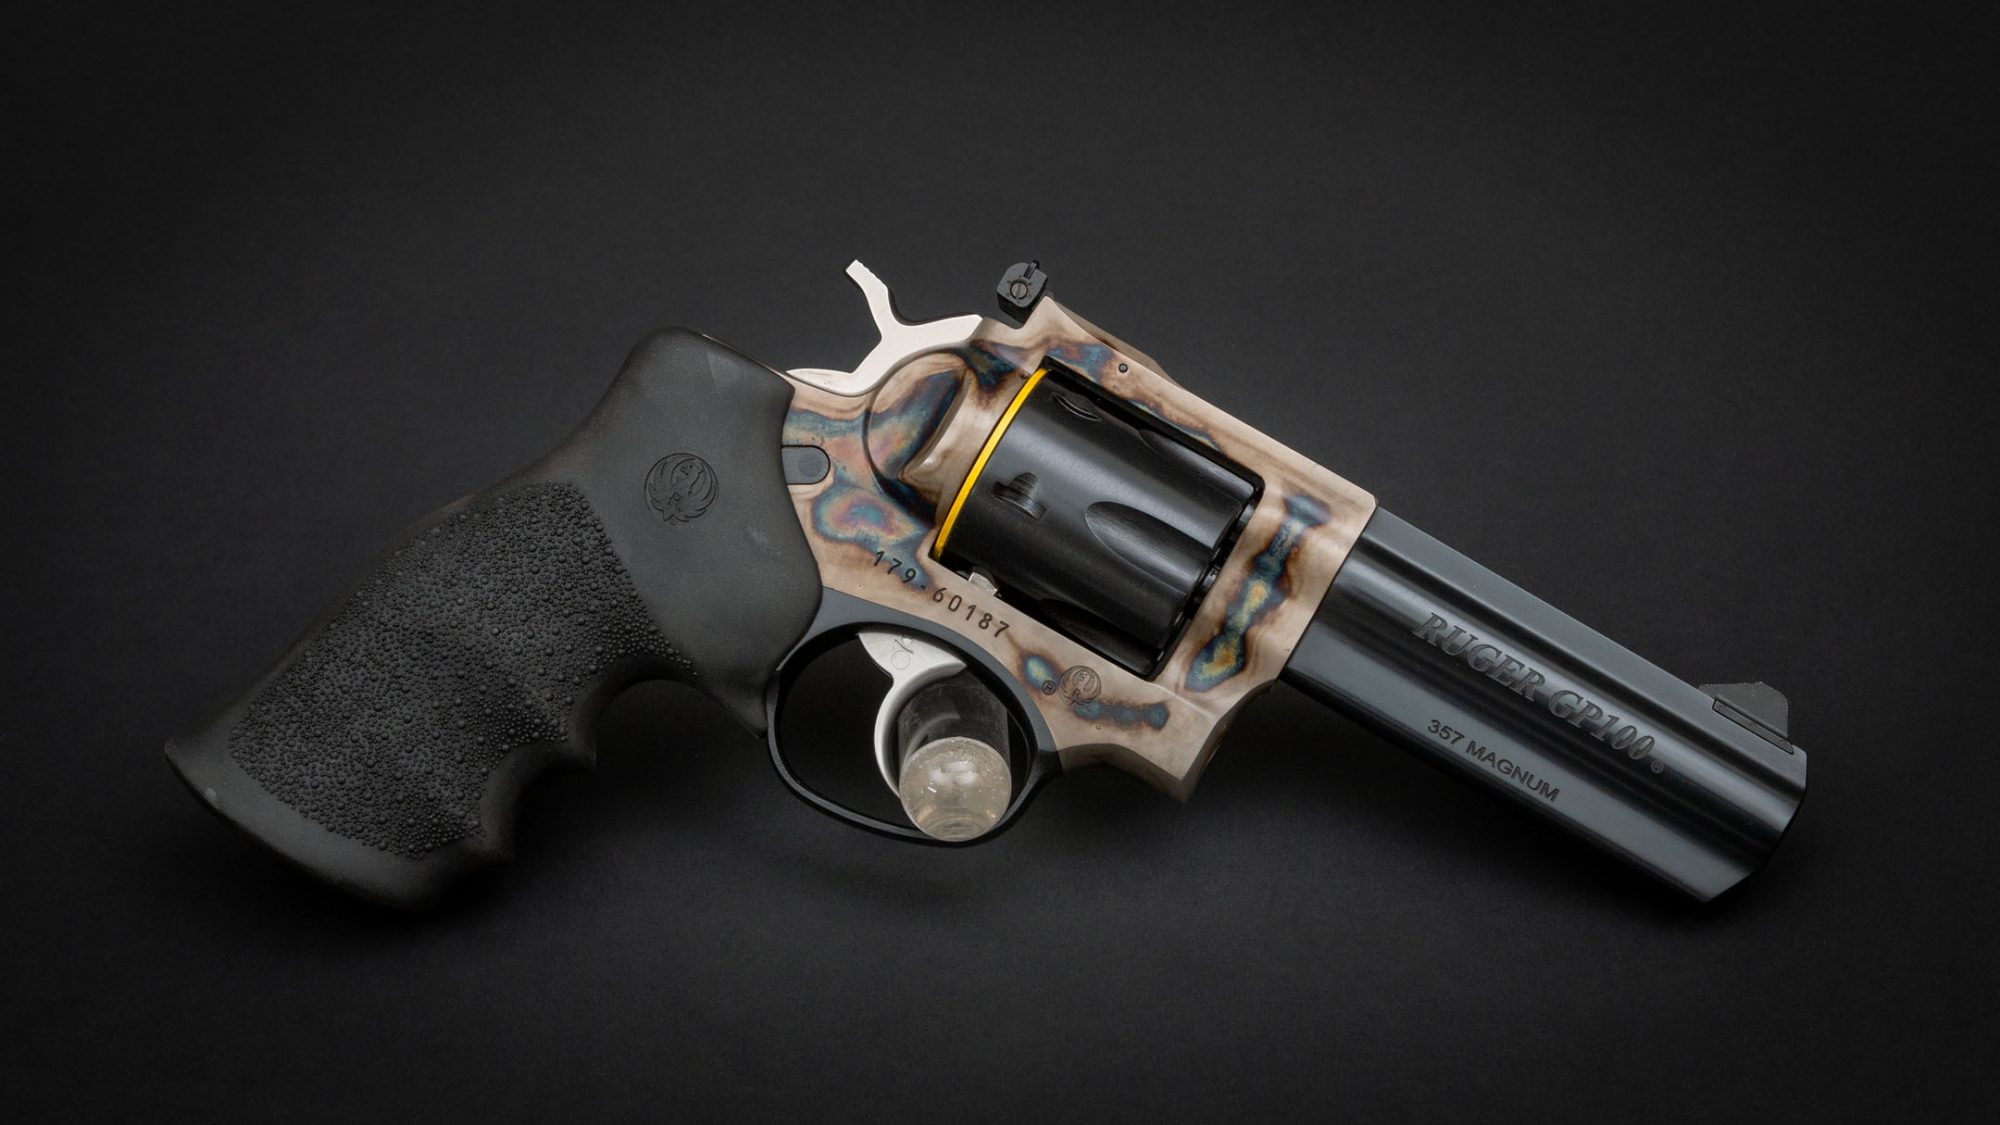 Photo of a Ruger GP100 revolver, featuring bone charcoal color case hardened frame by Turnbull Restoration Co. of Bloomfield, NY